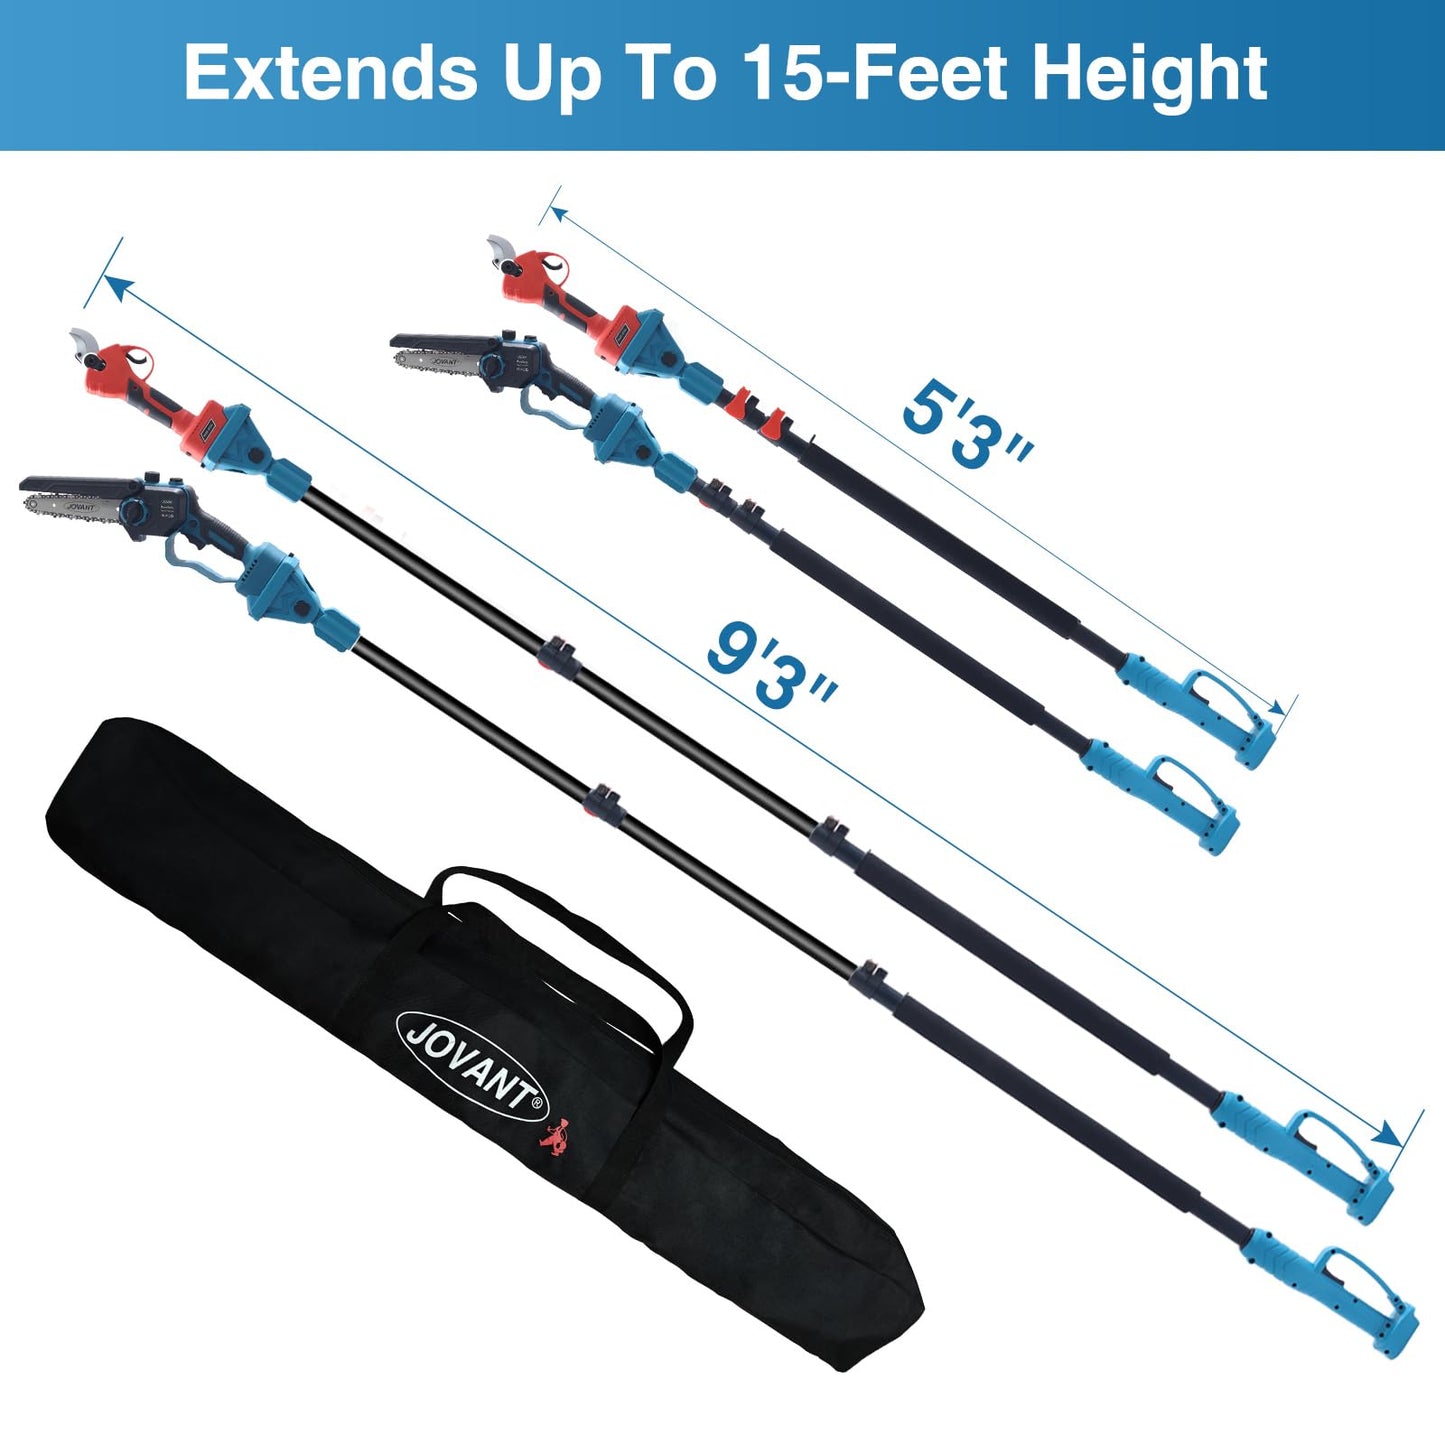 Extends Up To 15-Feet Height Reach Pole Length: 5'3" to 9'3"